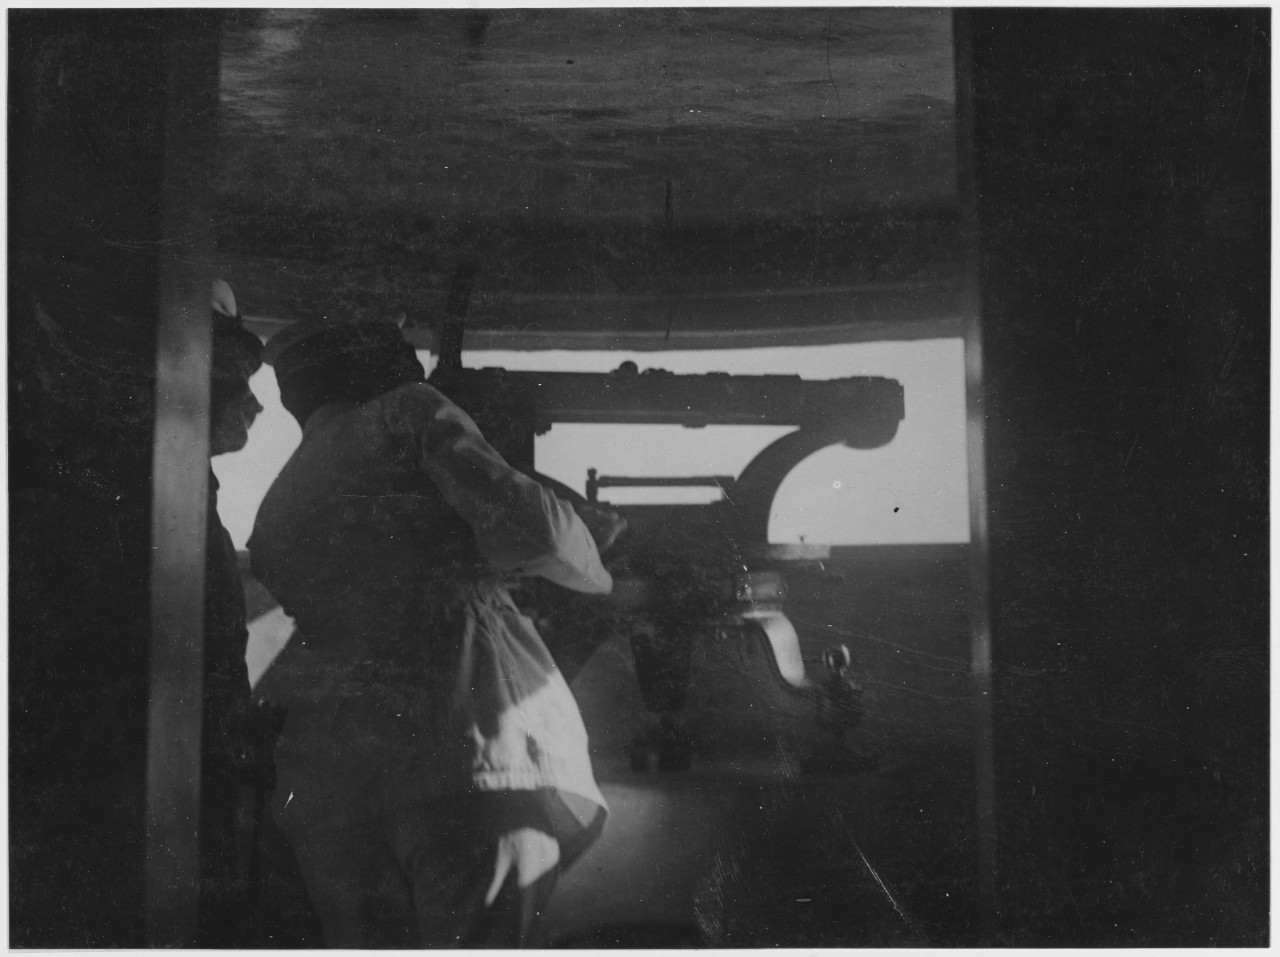 Range finding in an armored turret of a coastal battery.